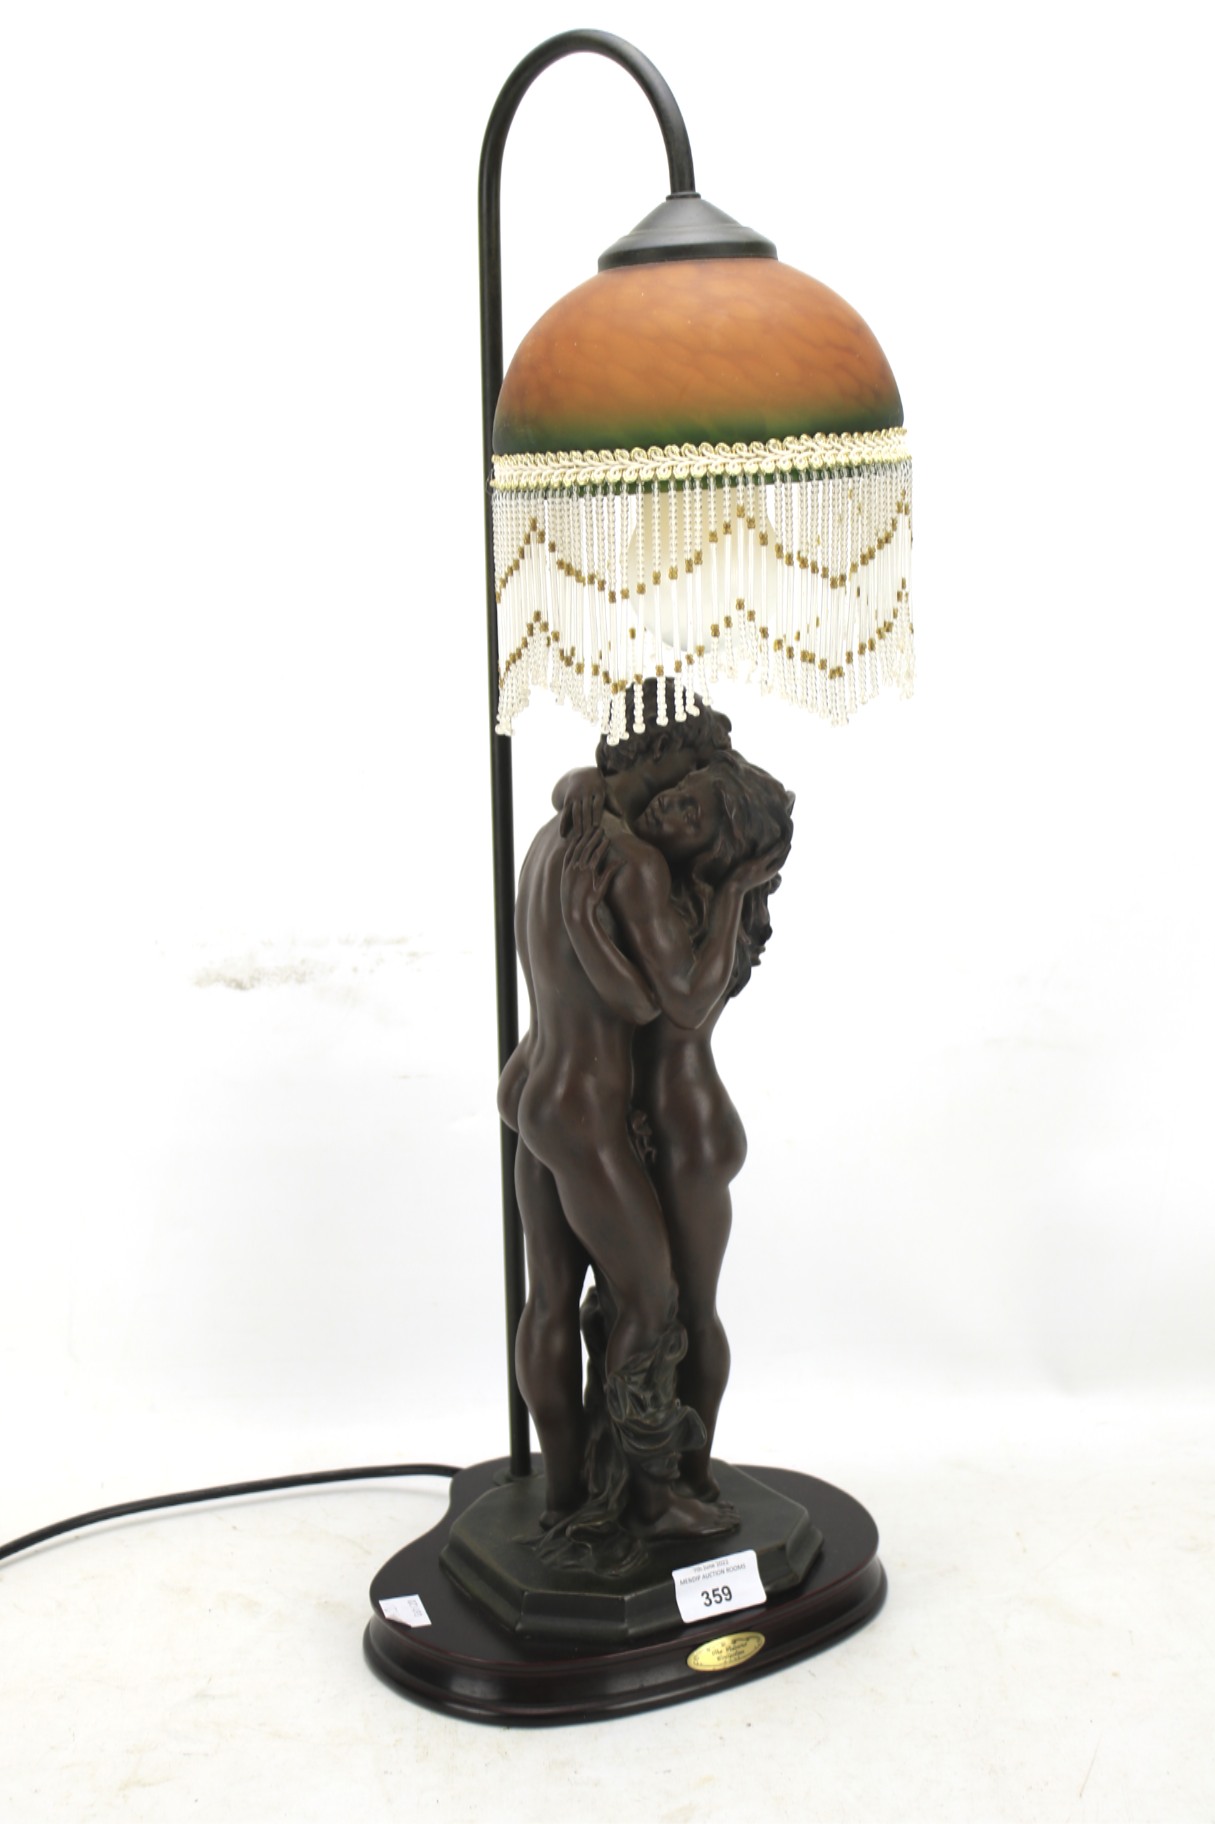 A contemporary table lamp from the Juliana Collection.